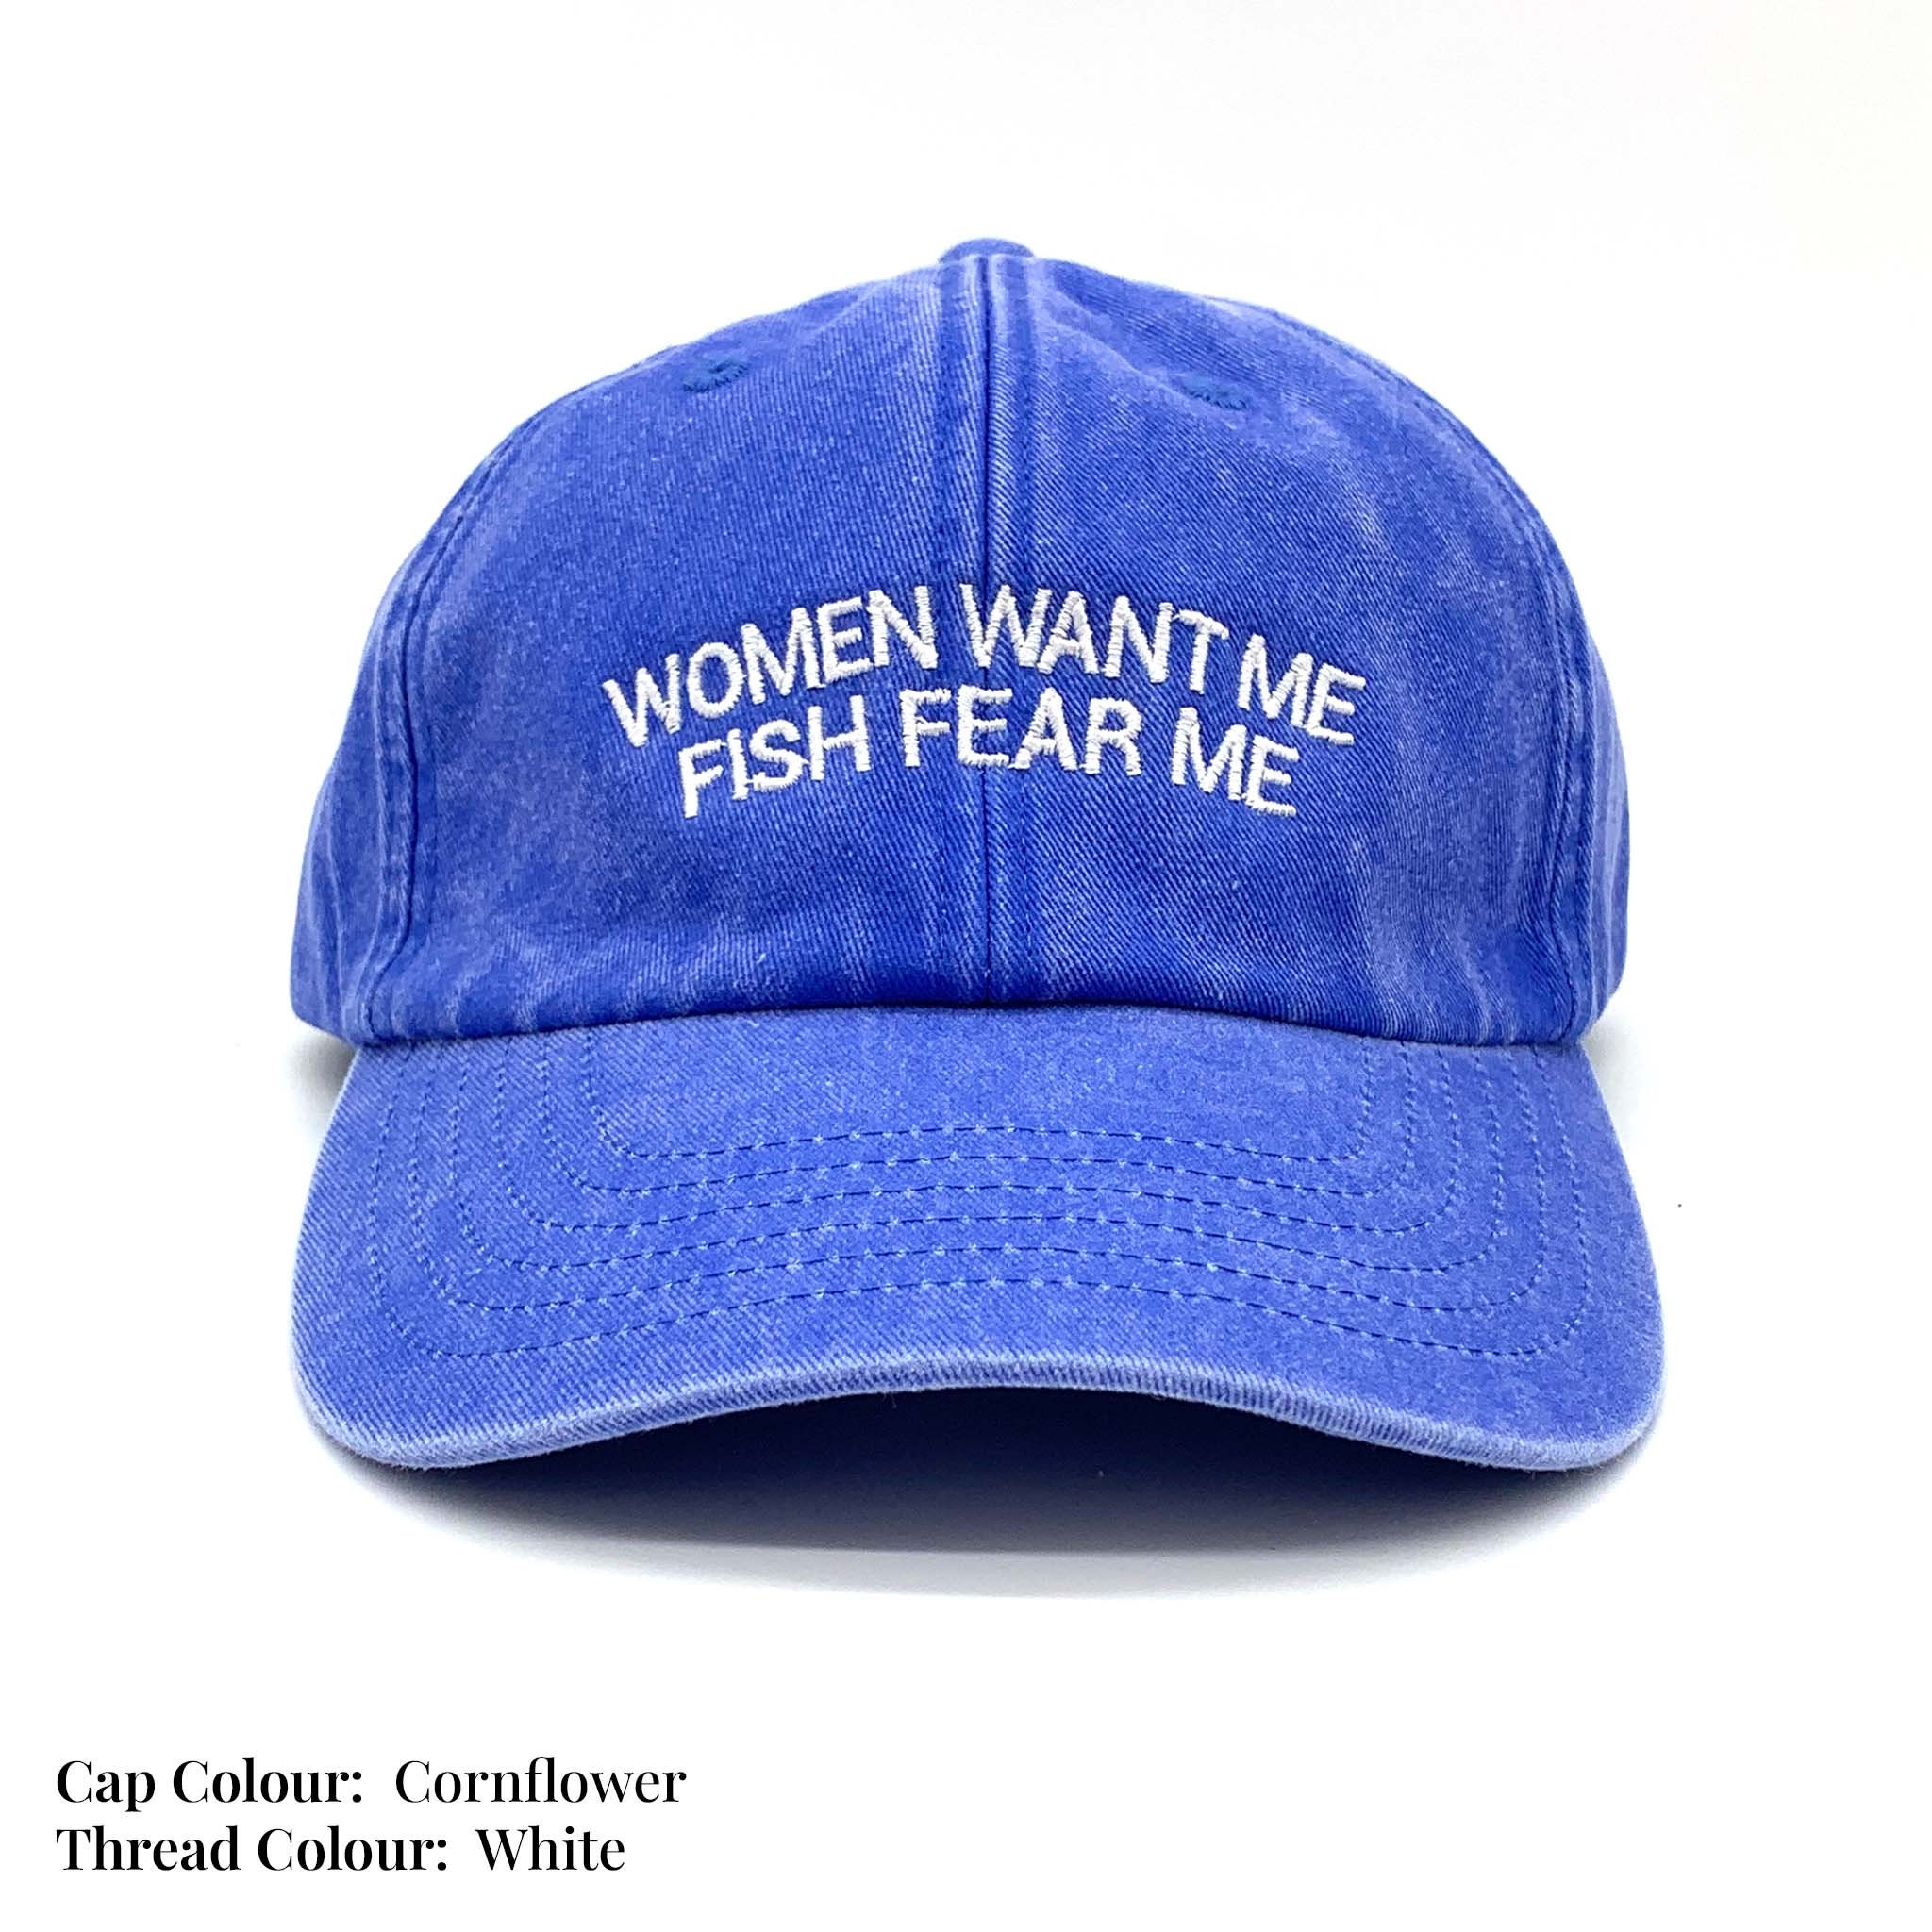 Women Want Me Fish Fear Me Embroidered Vintage Canvas Cap 